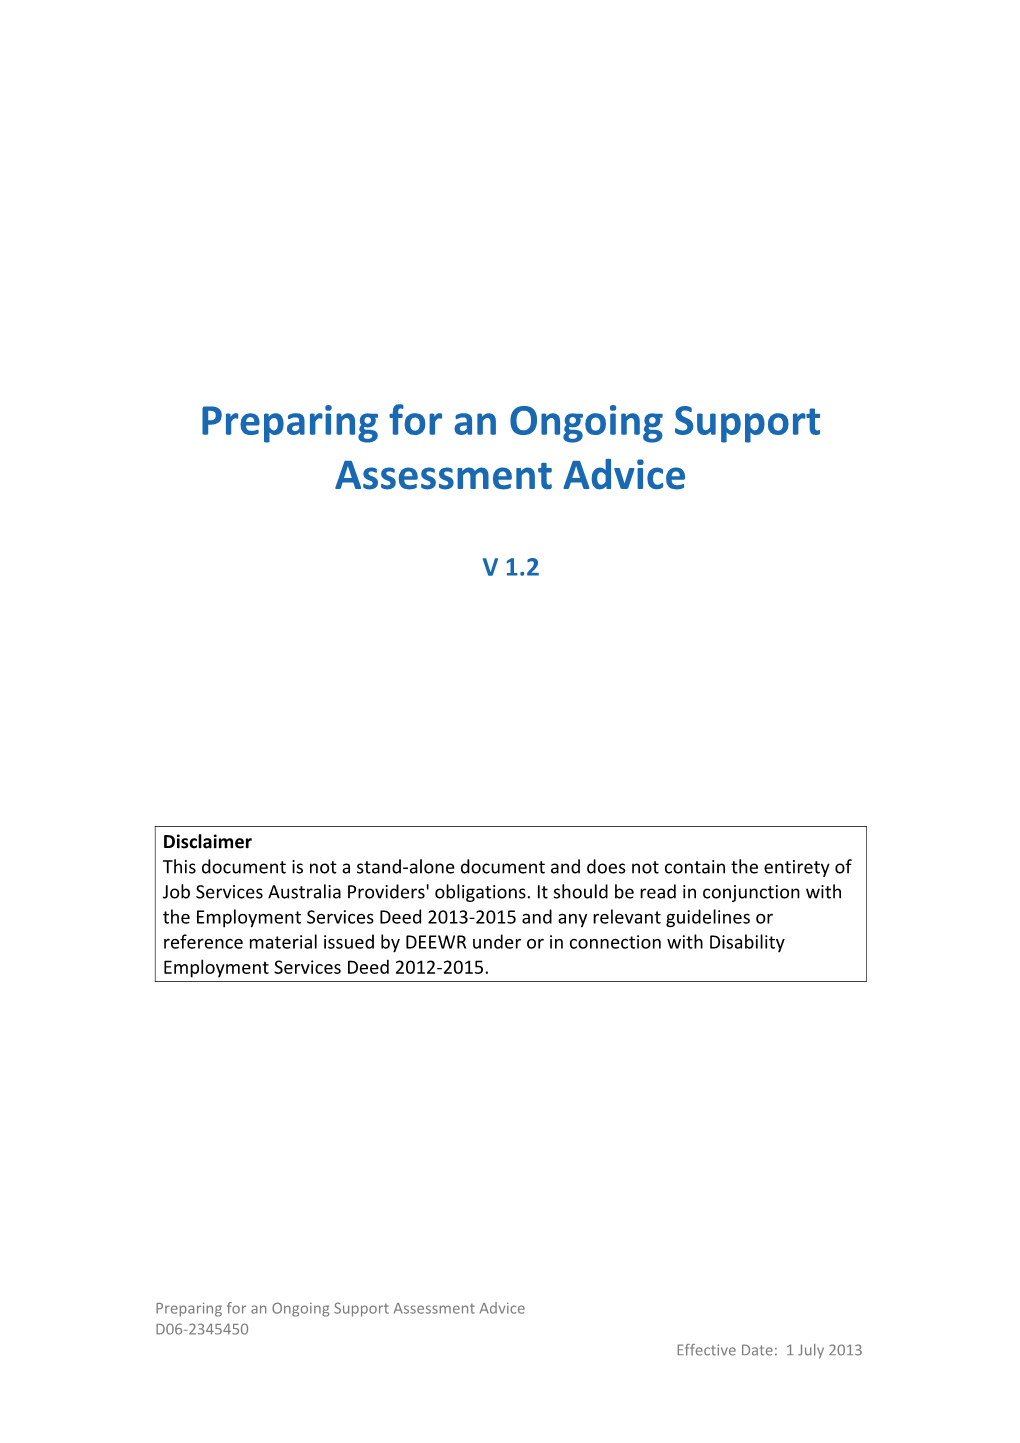 Preparing for an Ongoing Support Assessment Advice